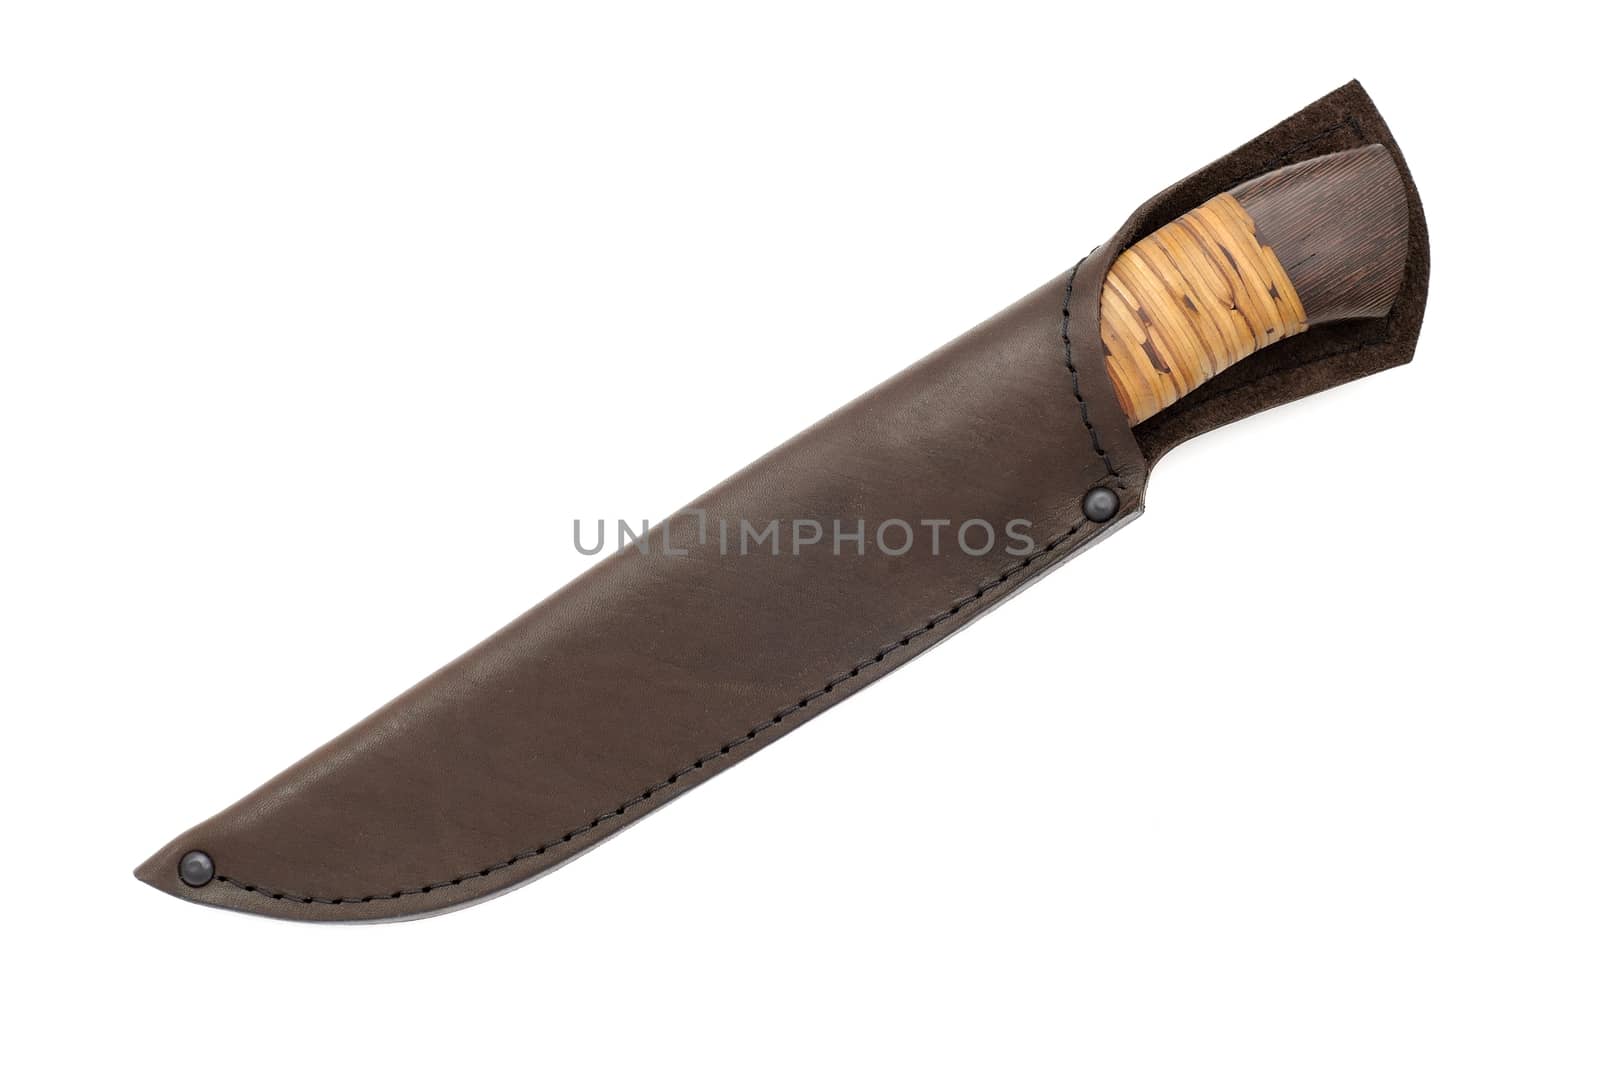 Hunting knife in sheath russian cold arms isolated